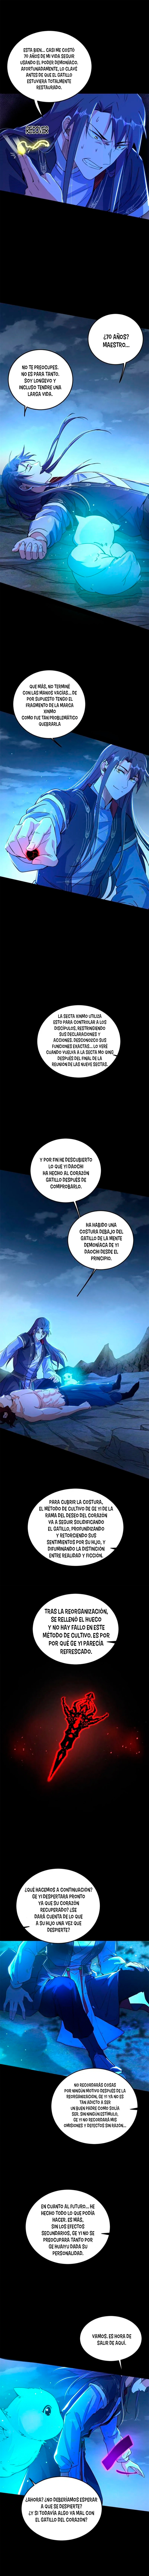 Manga Soy un dios maligno Chapter 312 image number 8